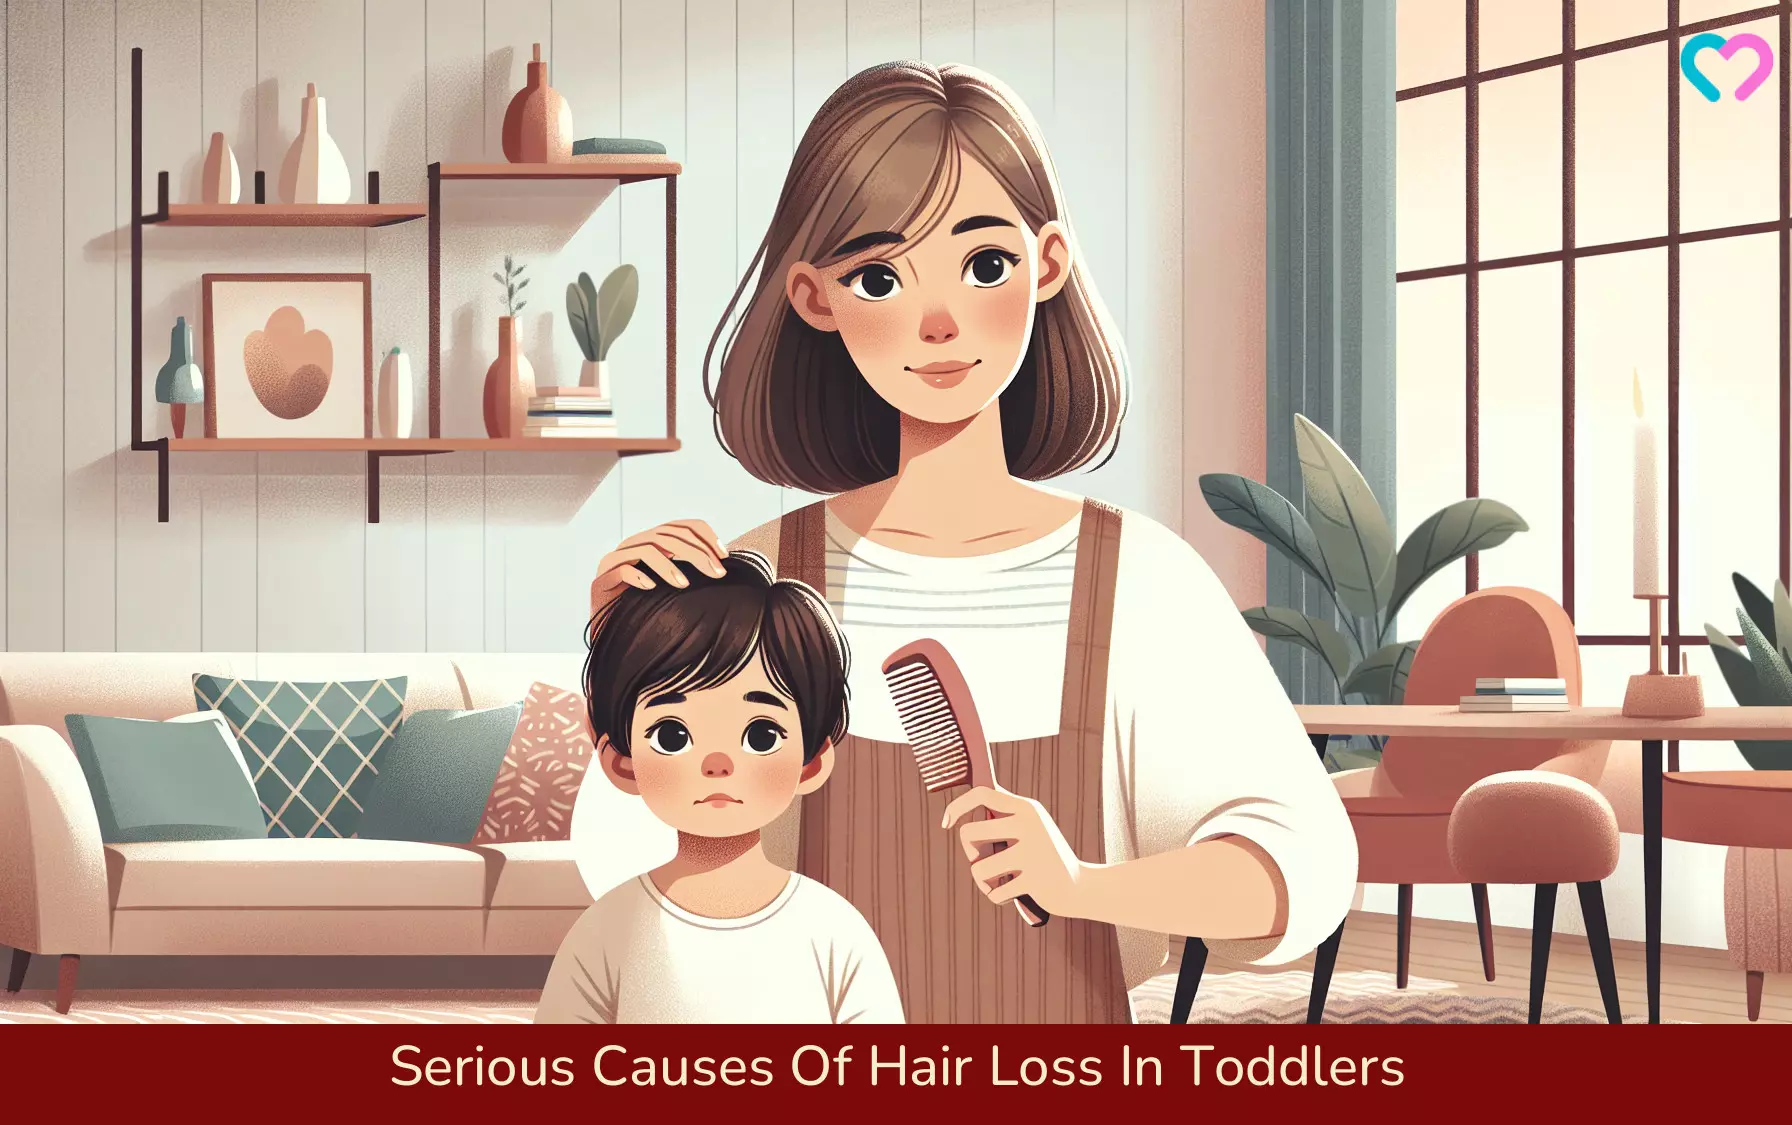 hair loss in toddlers_illustration